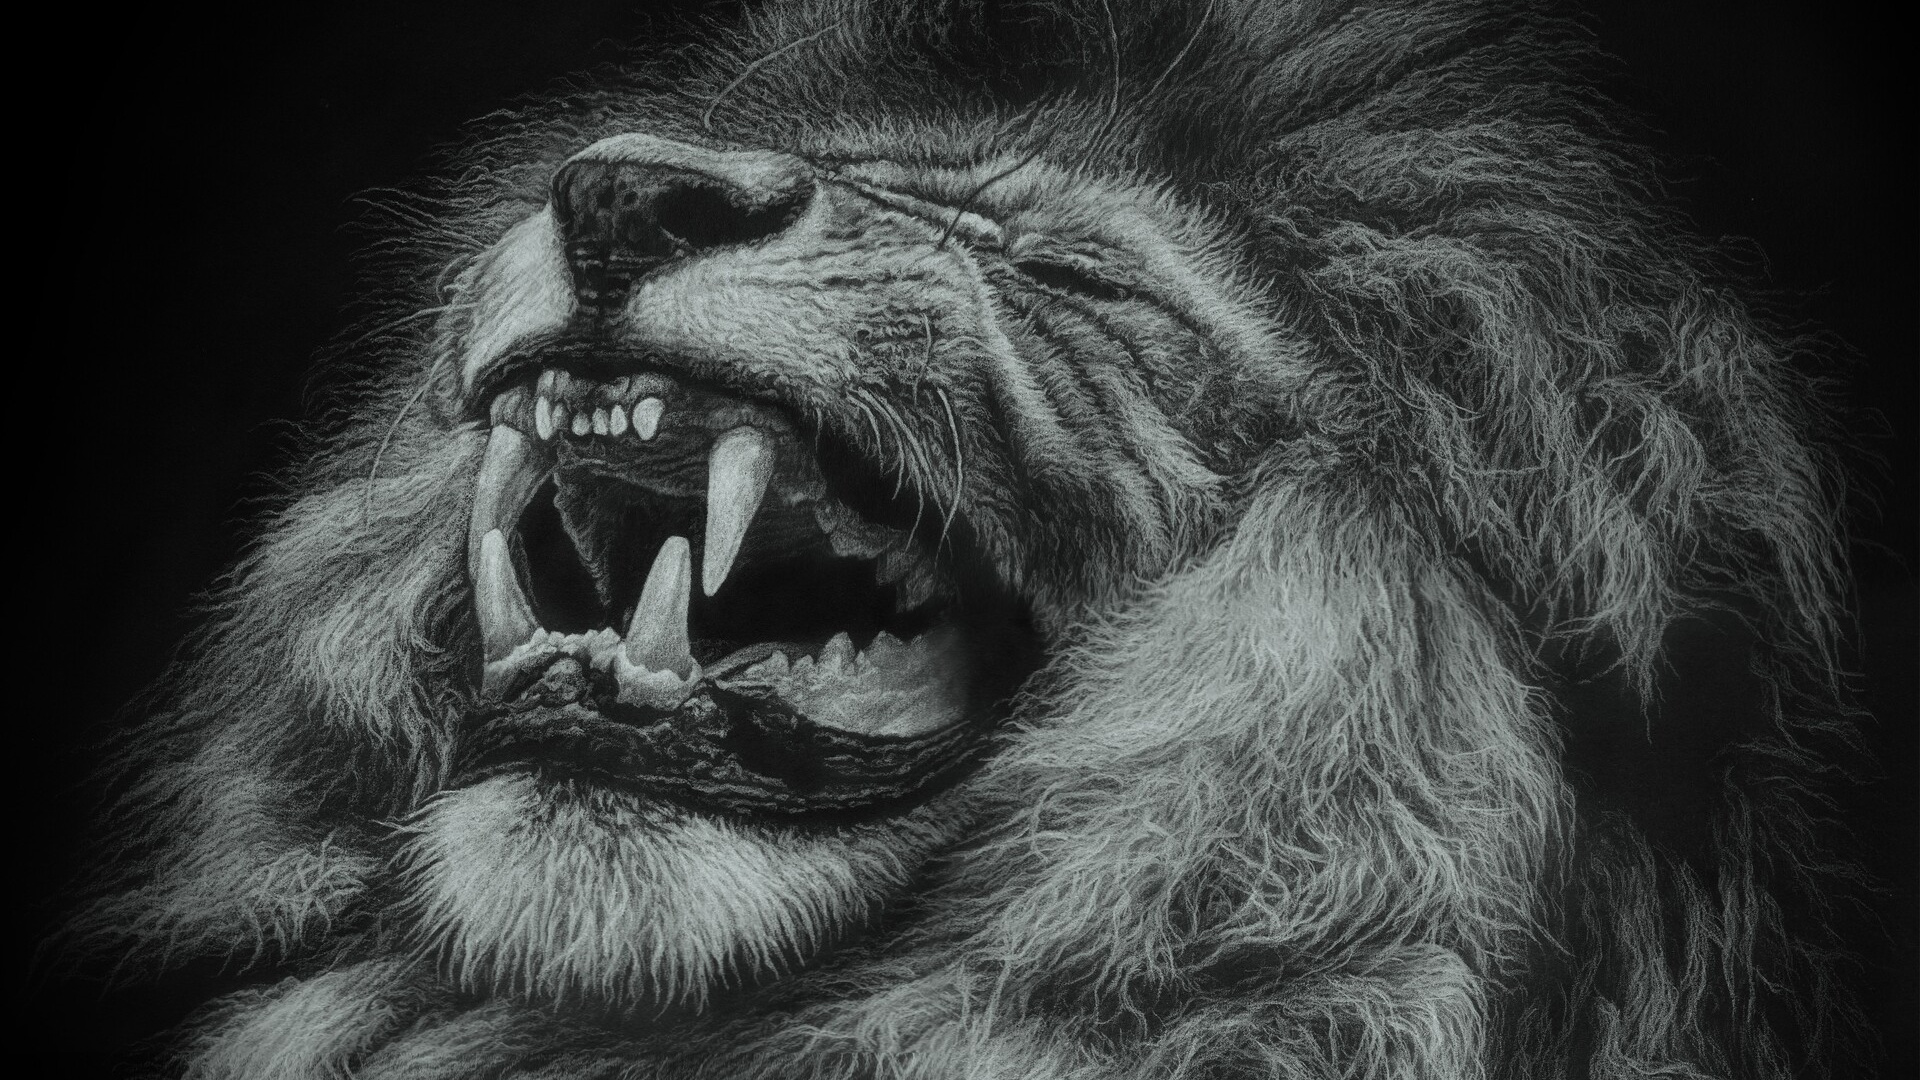 Lion With Mouth Open Illustration. Wallpaper in 1920x1080 Resolution